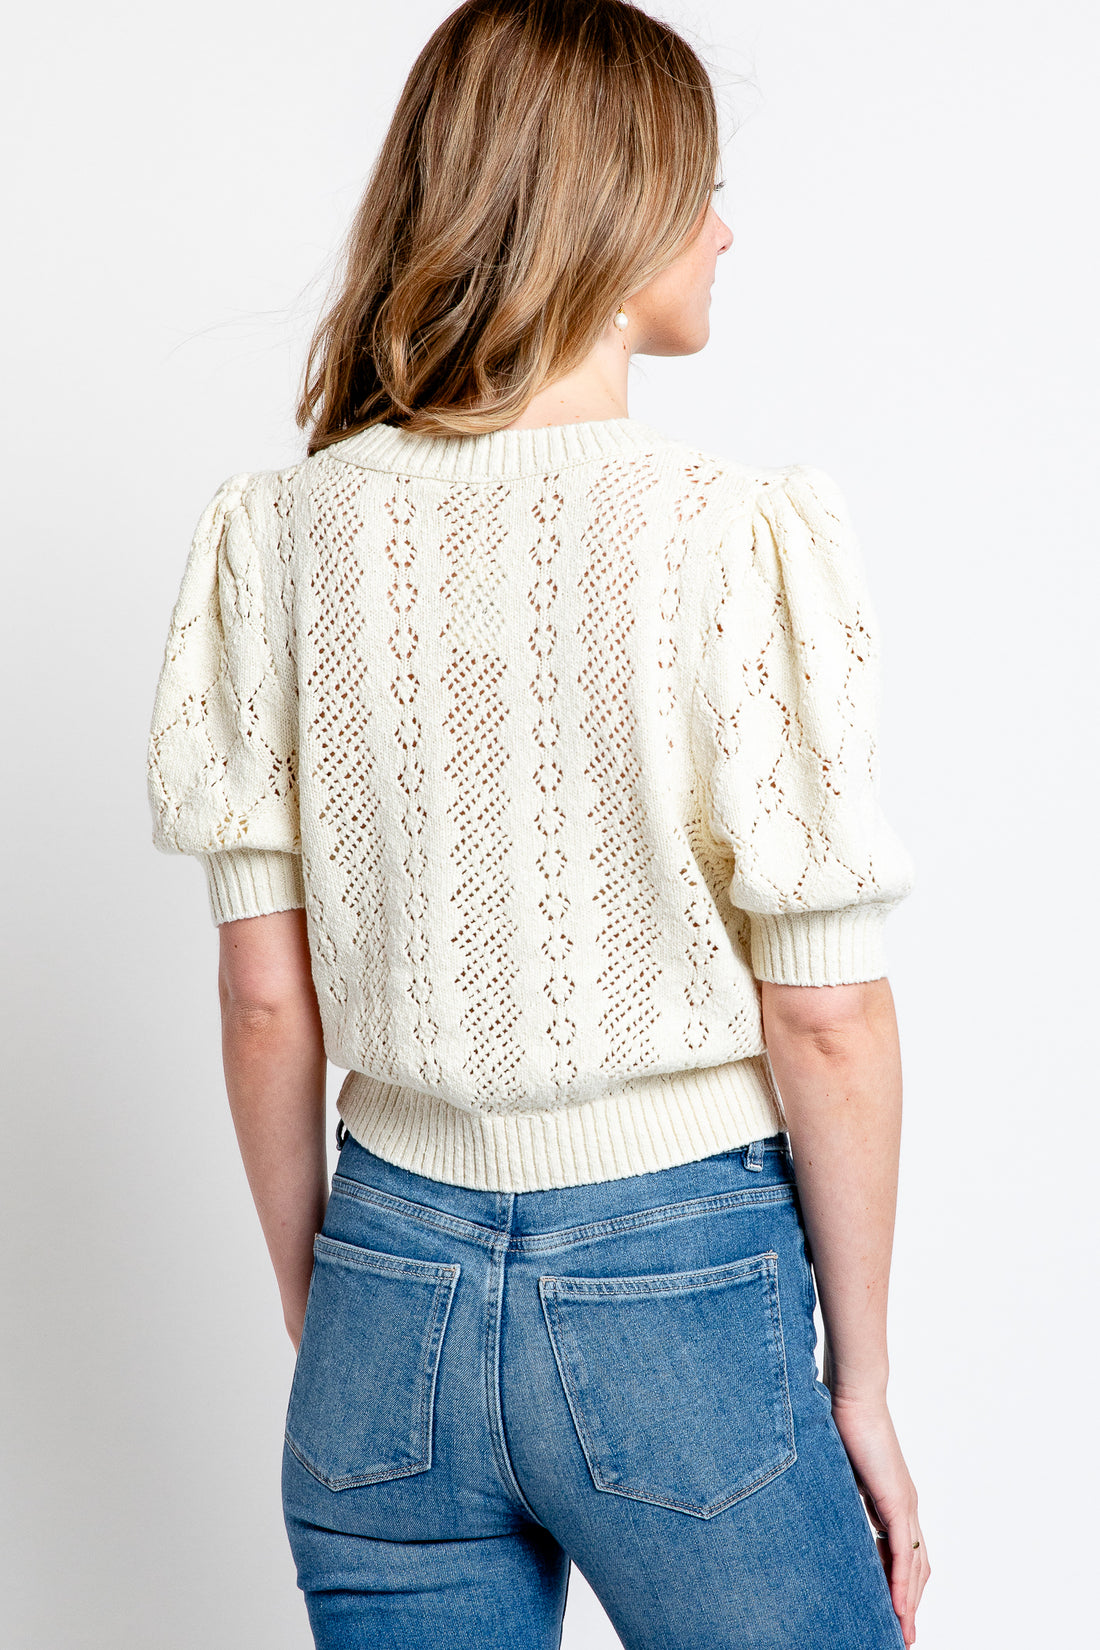 Free People Eloise Pullover in Tofu